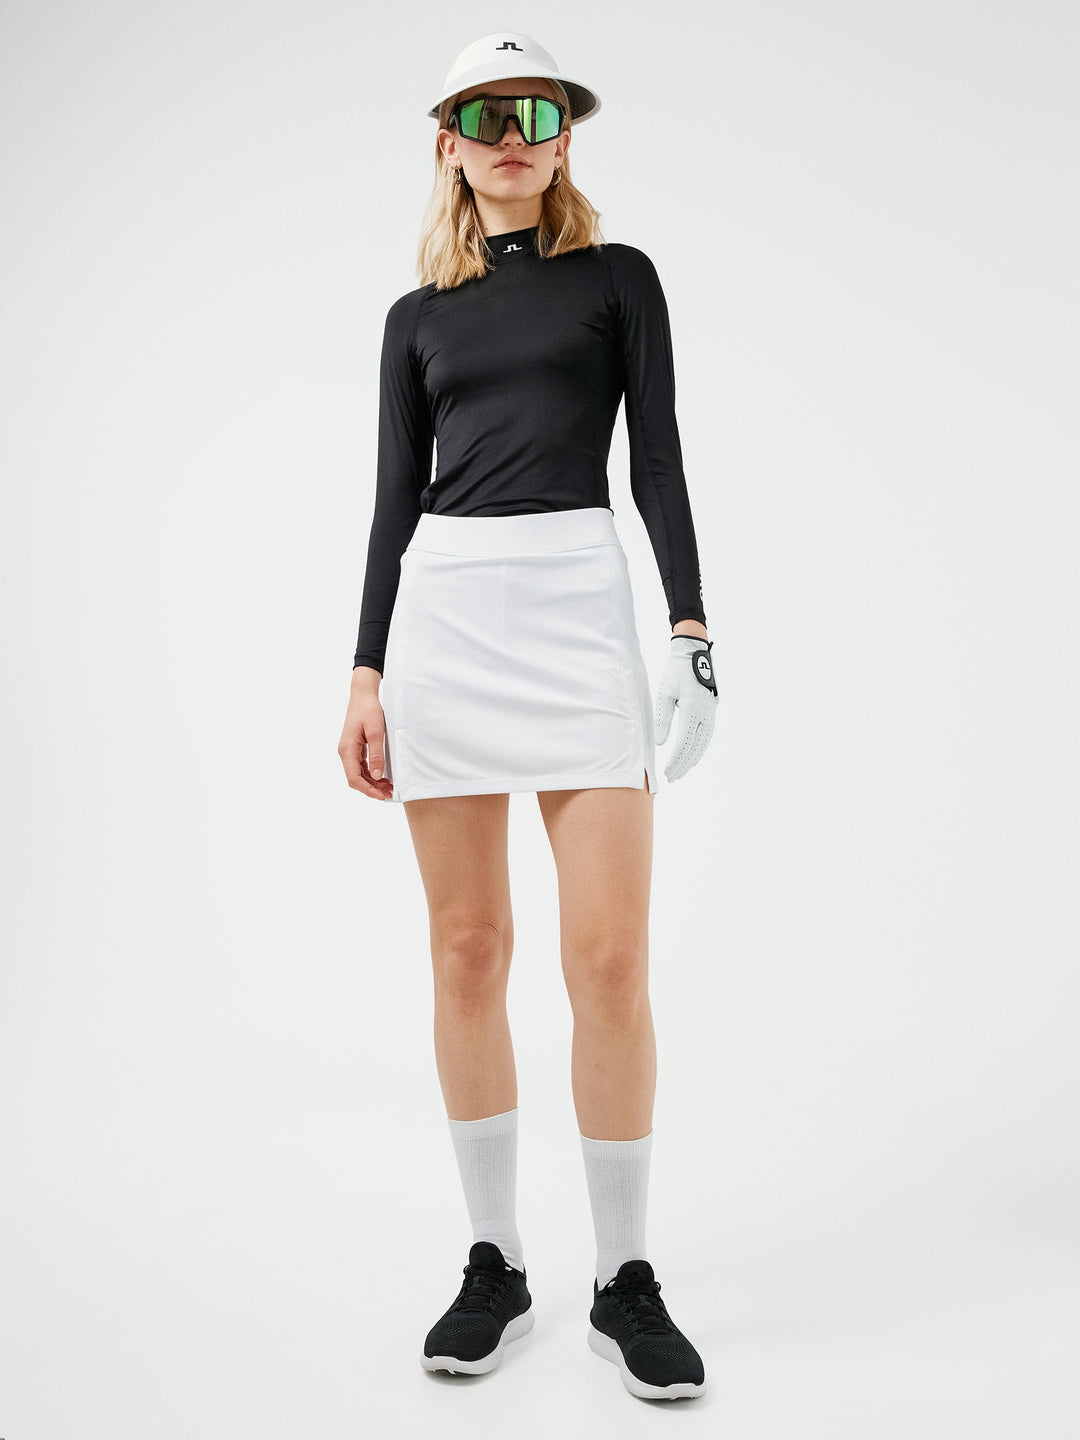 J.Lindeberg Womens Amelie Mid Golf Skirt - WHITE - Golf Anything Canada